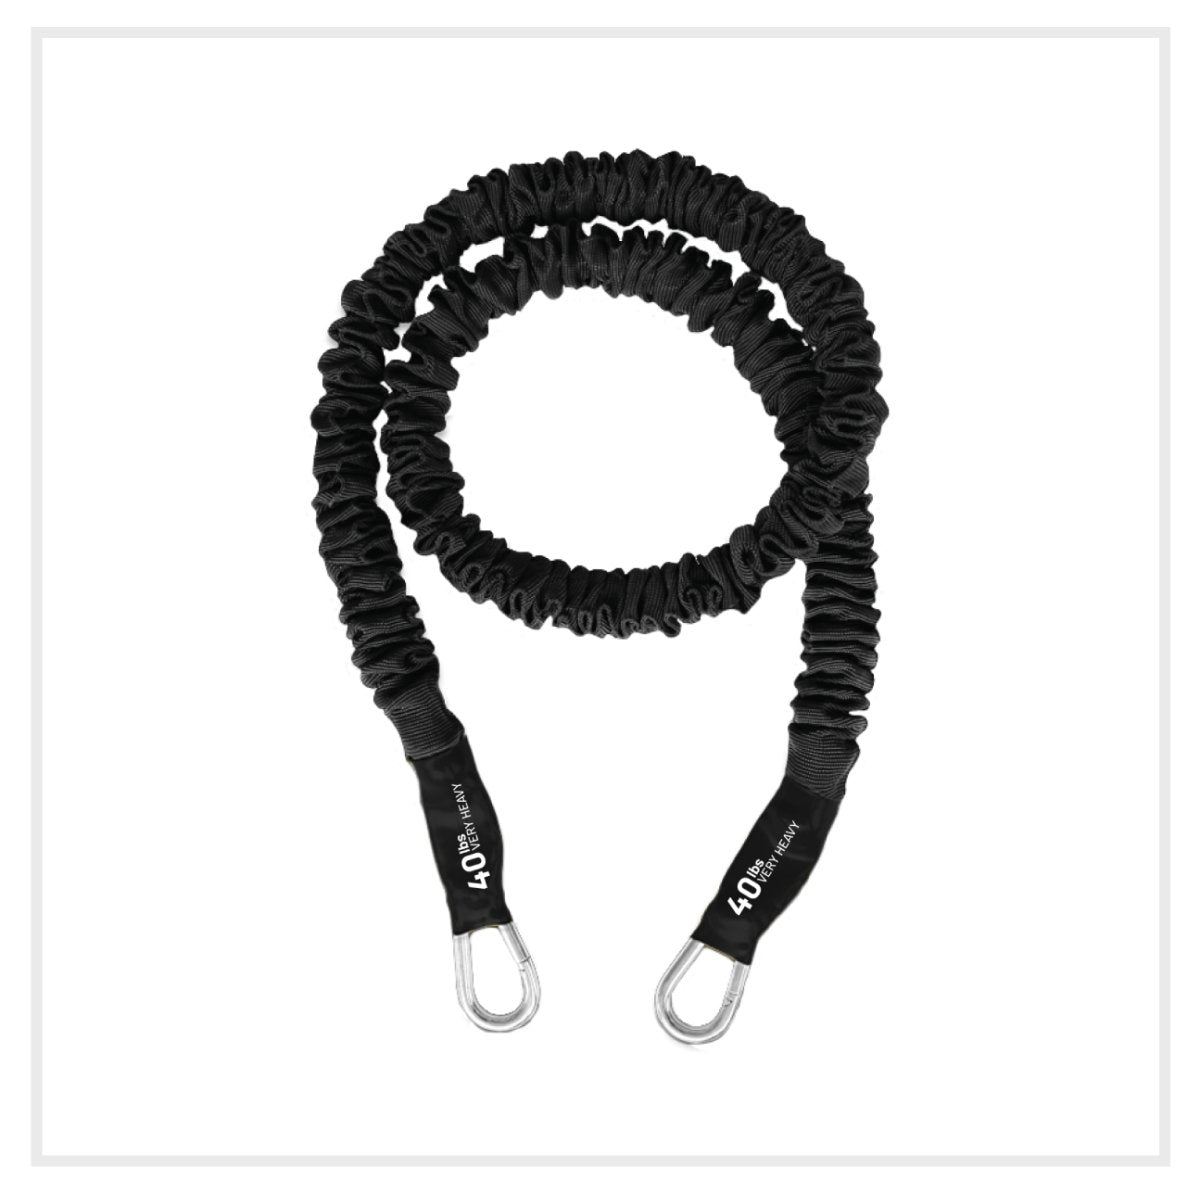 Stackable tension bands with clip on each end. this bungee style resistance cord is designed for all workouts, exercise routine and fitness journey. covered, sheathed for your safety, to be anti-snap and long lasting. Best band on the market for a High resistance tension tube workout